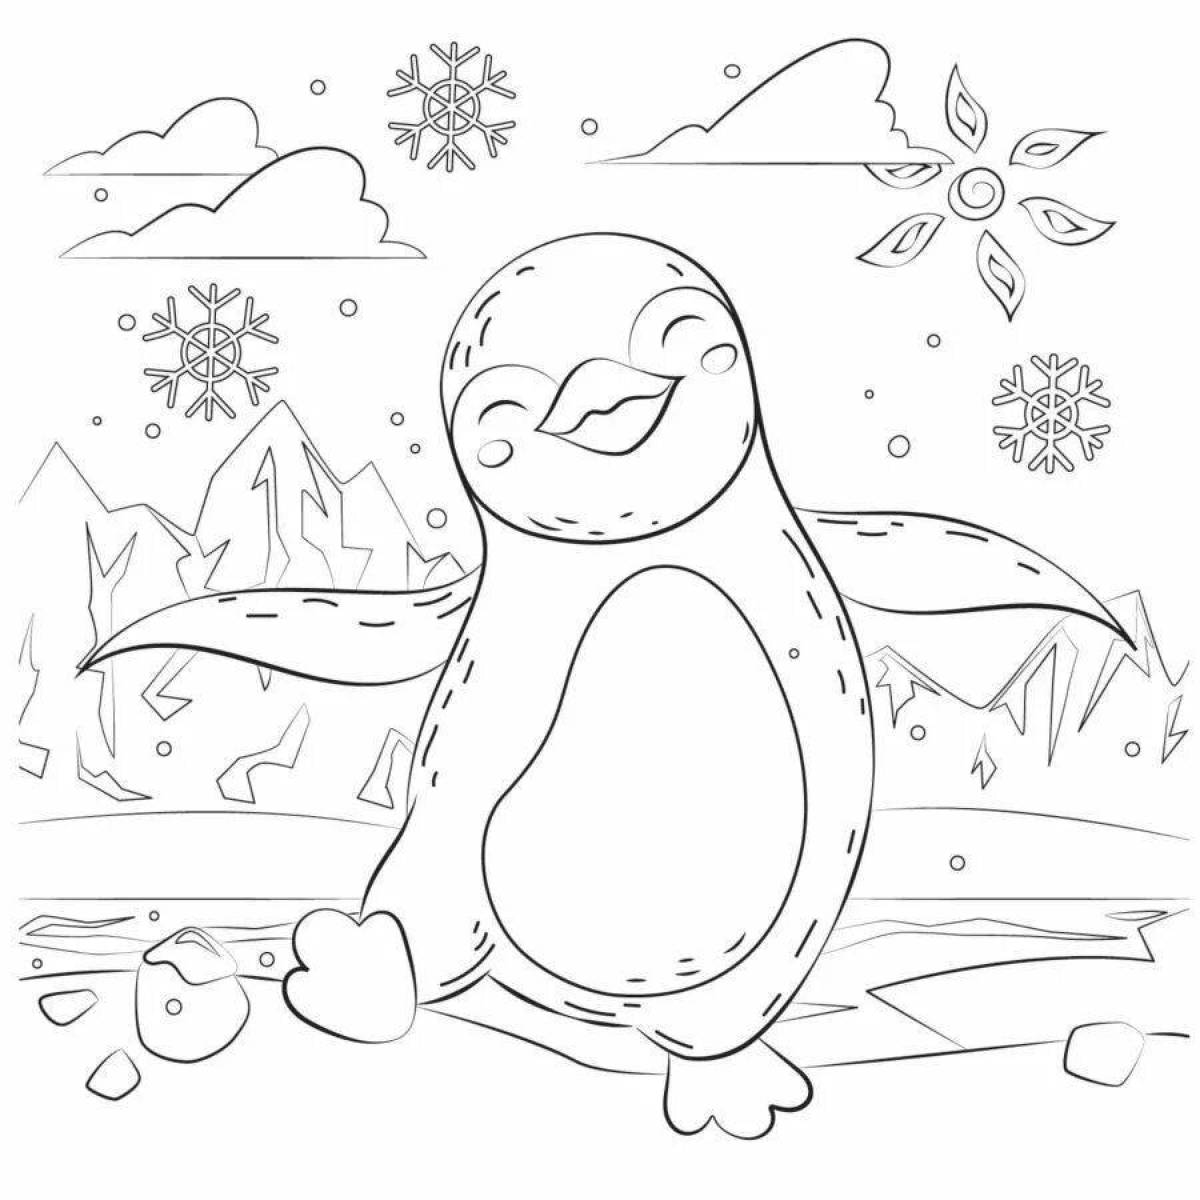 Cute penguin coloring pages for kids